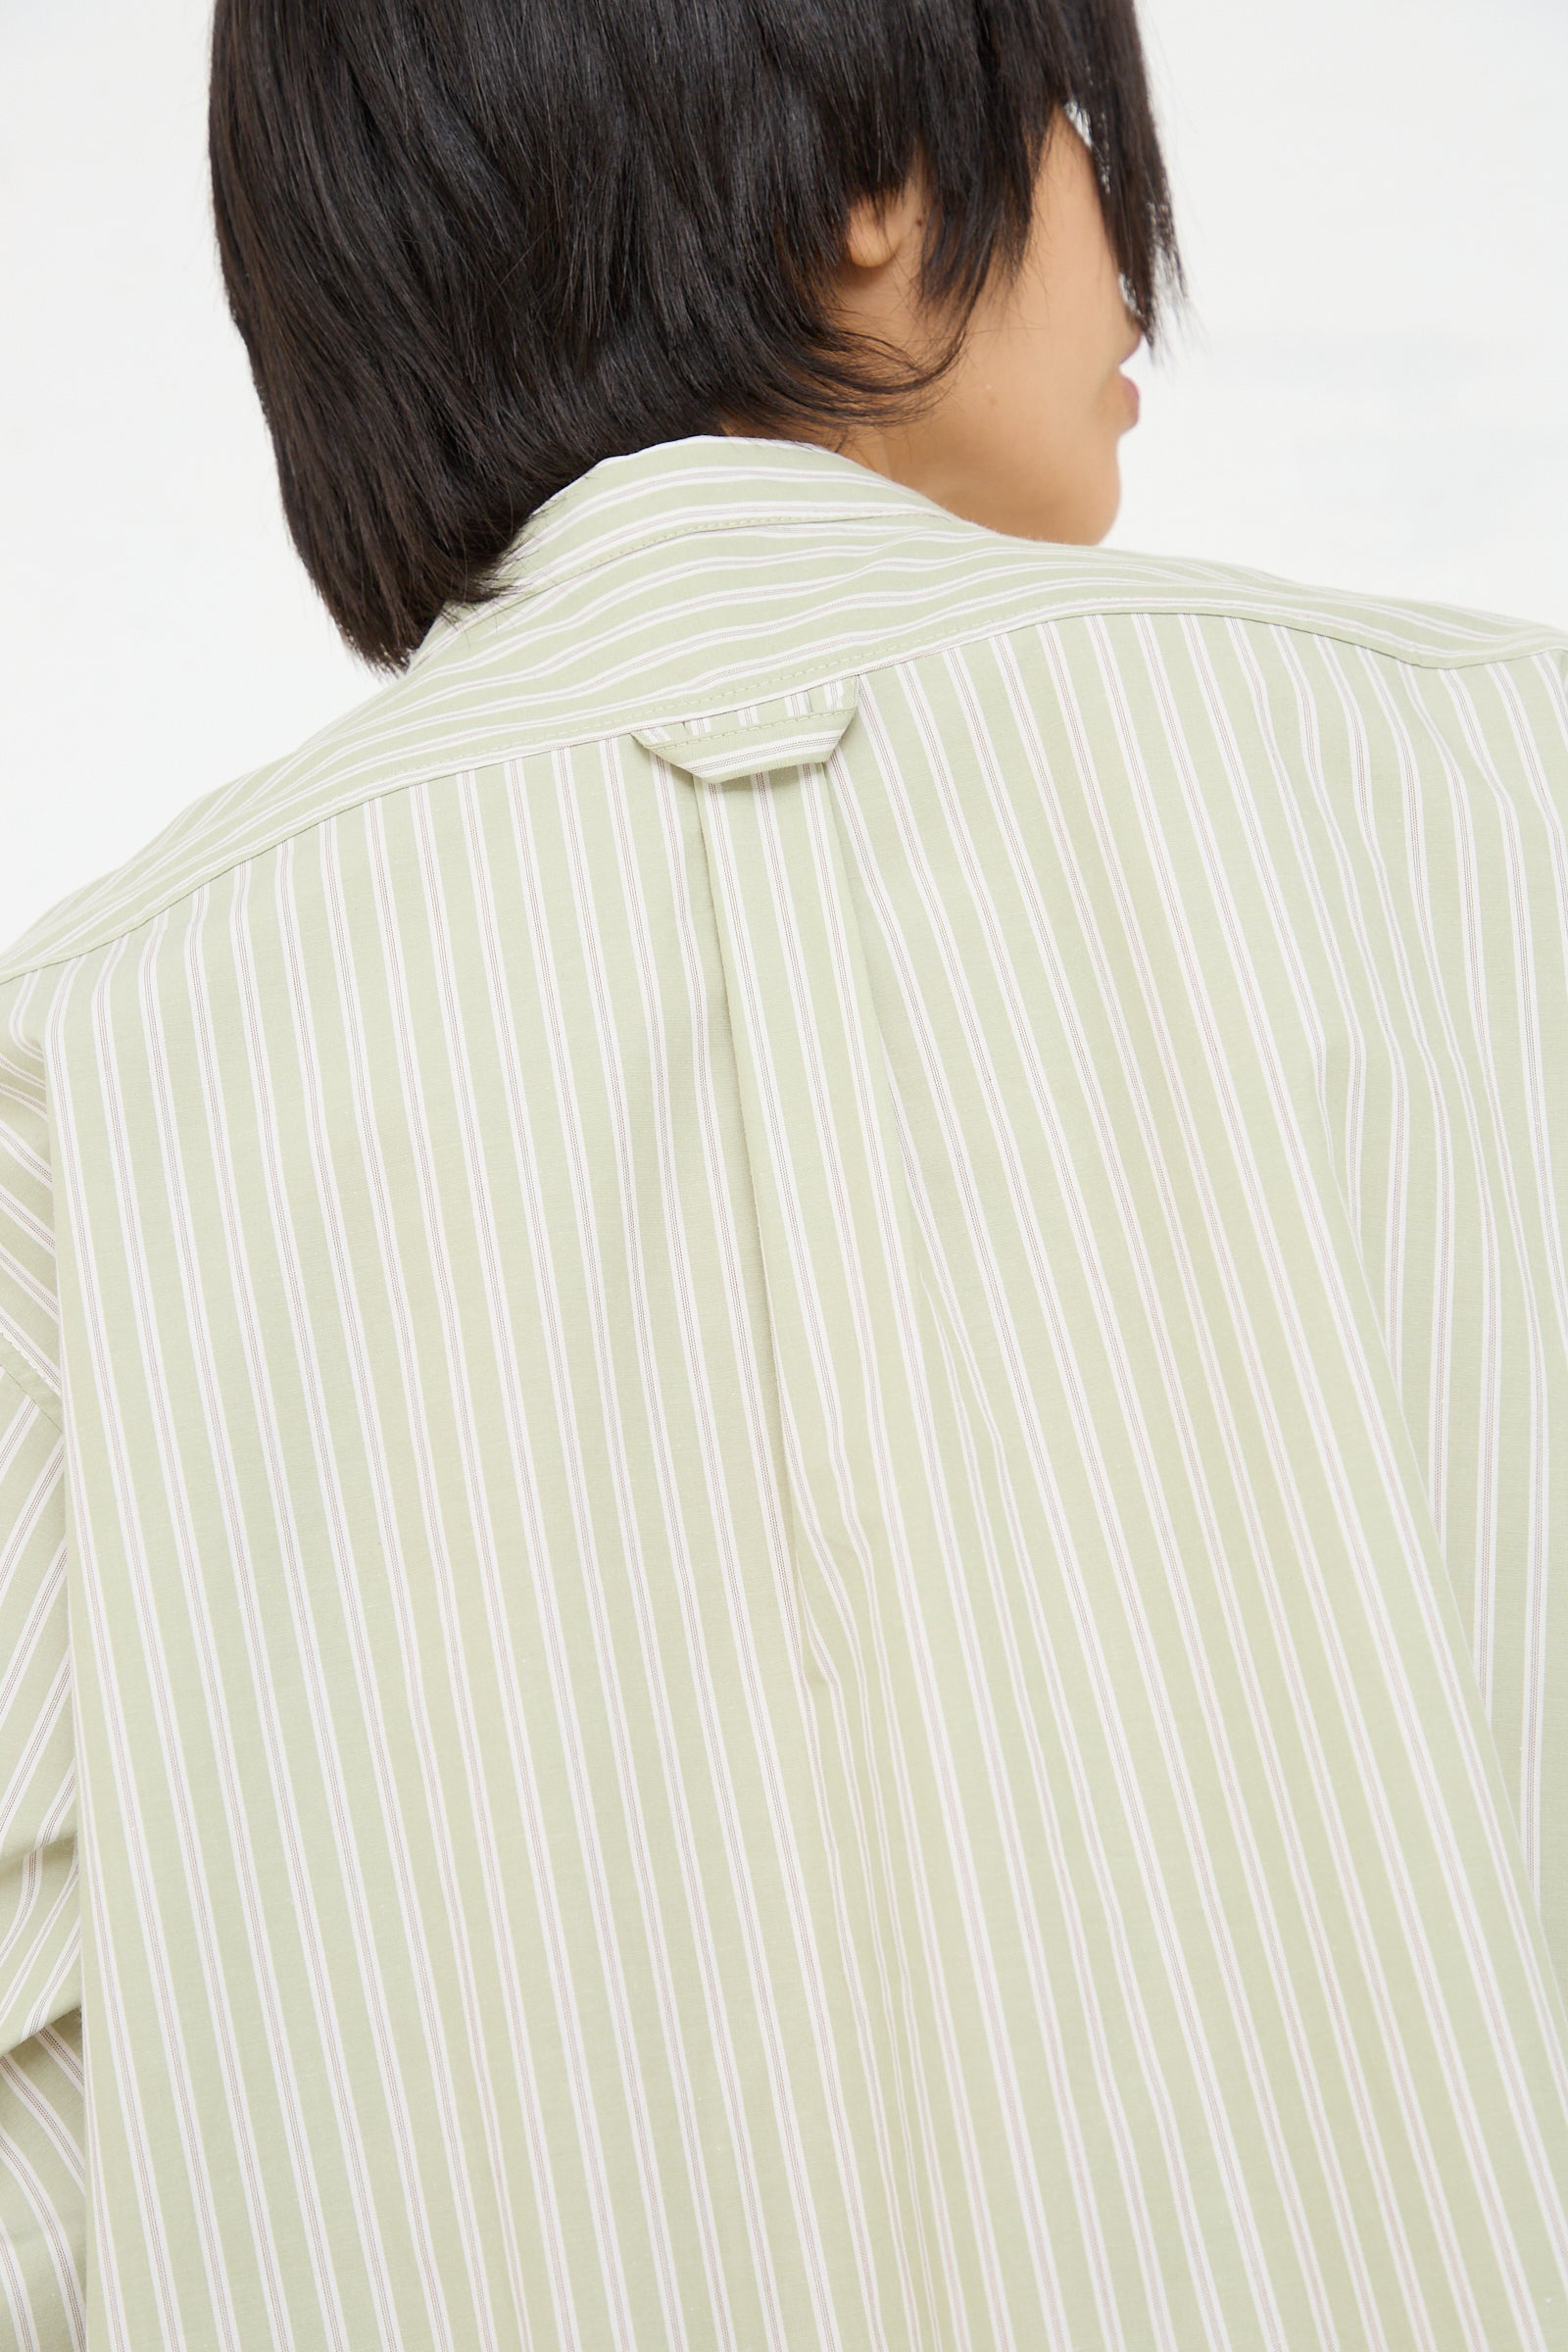 Rear view of a person wearing a Cawley Japanese Cotton Ines Shirt in Mint and Ecru.